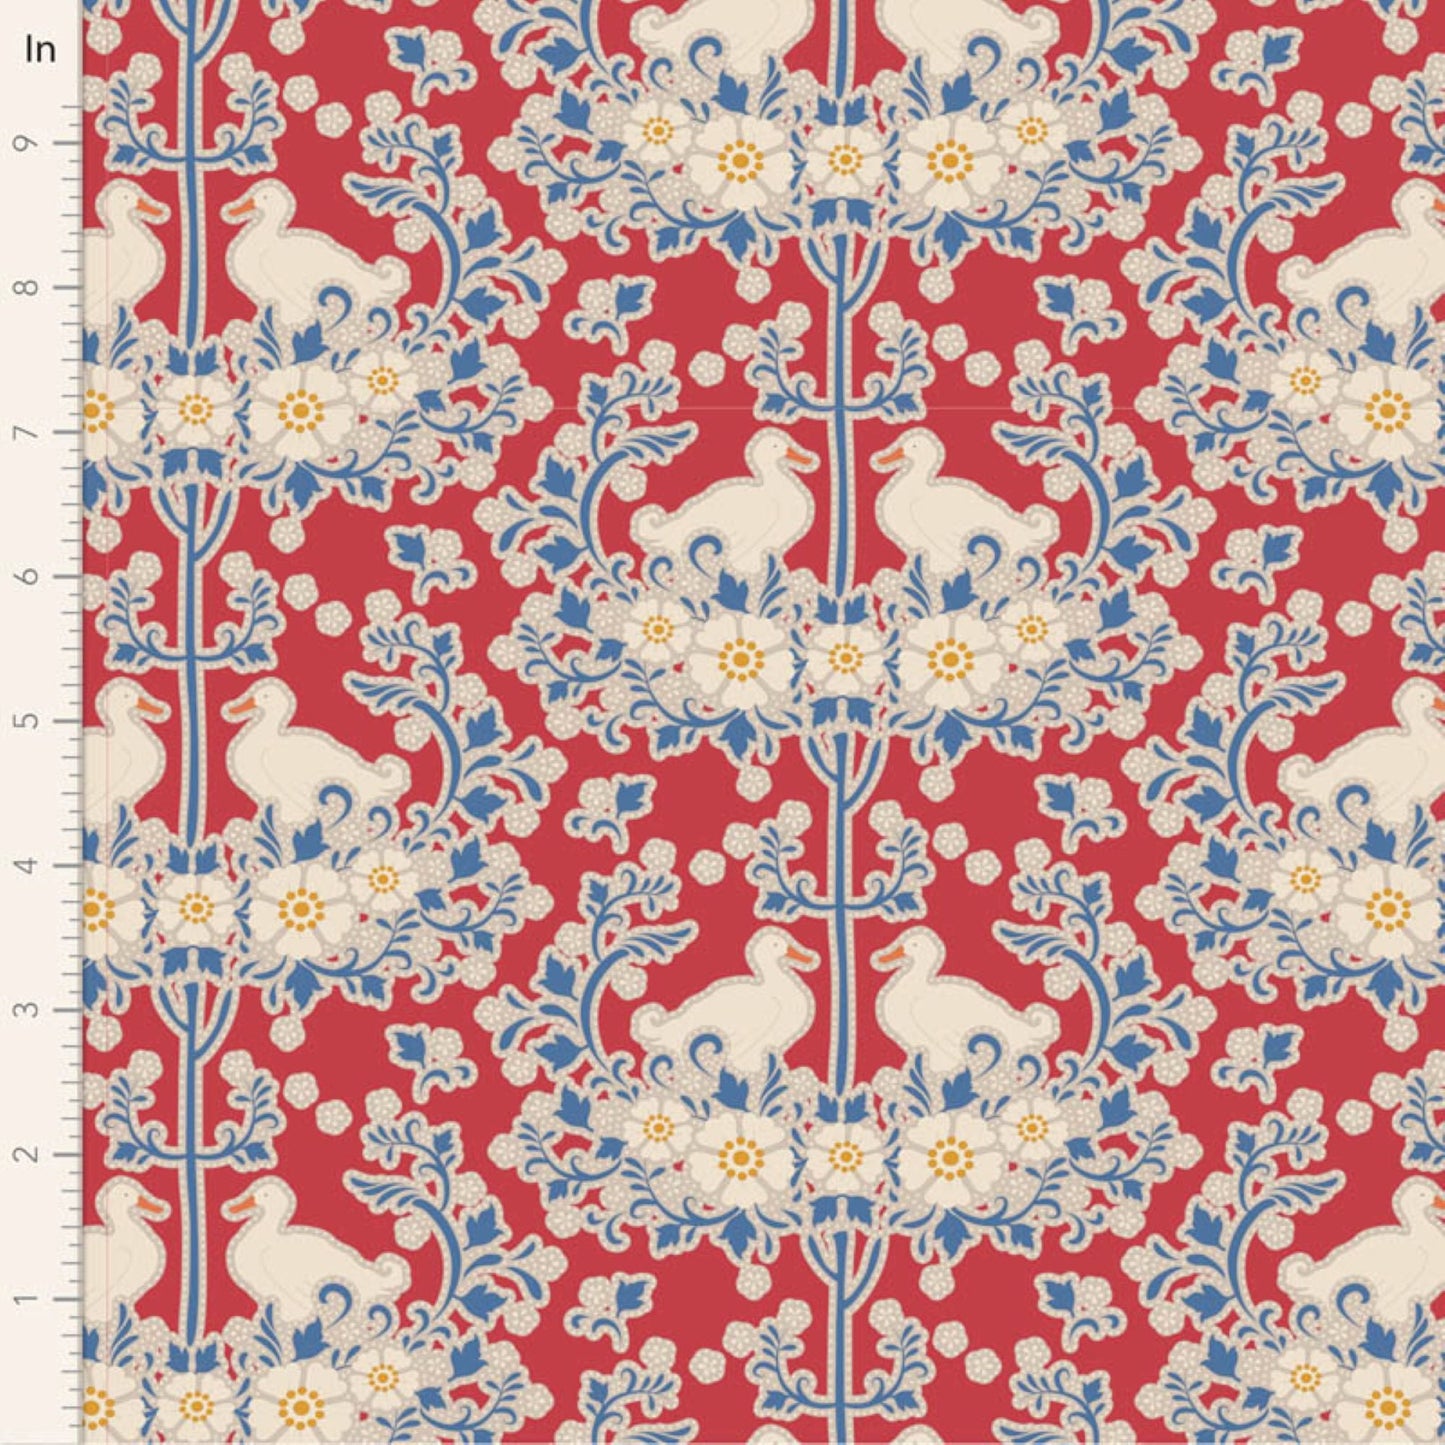 Tilda Jubilee and Farm Flowers floral red bundle 7 Fat Eighths cotton quilt fabric